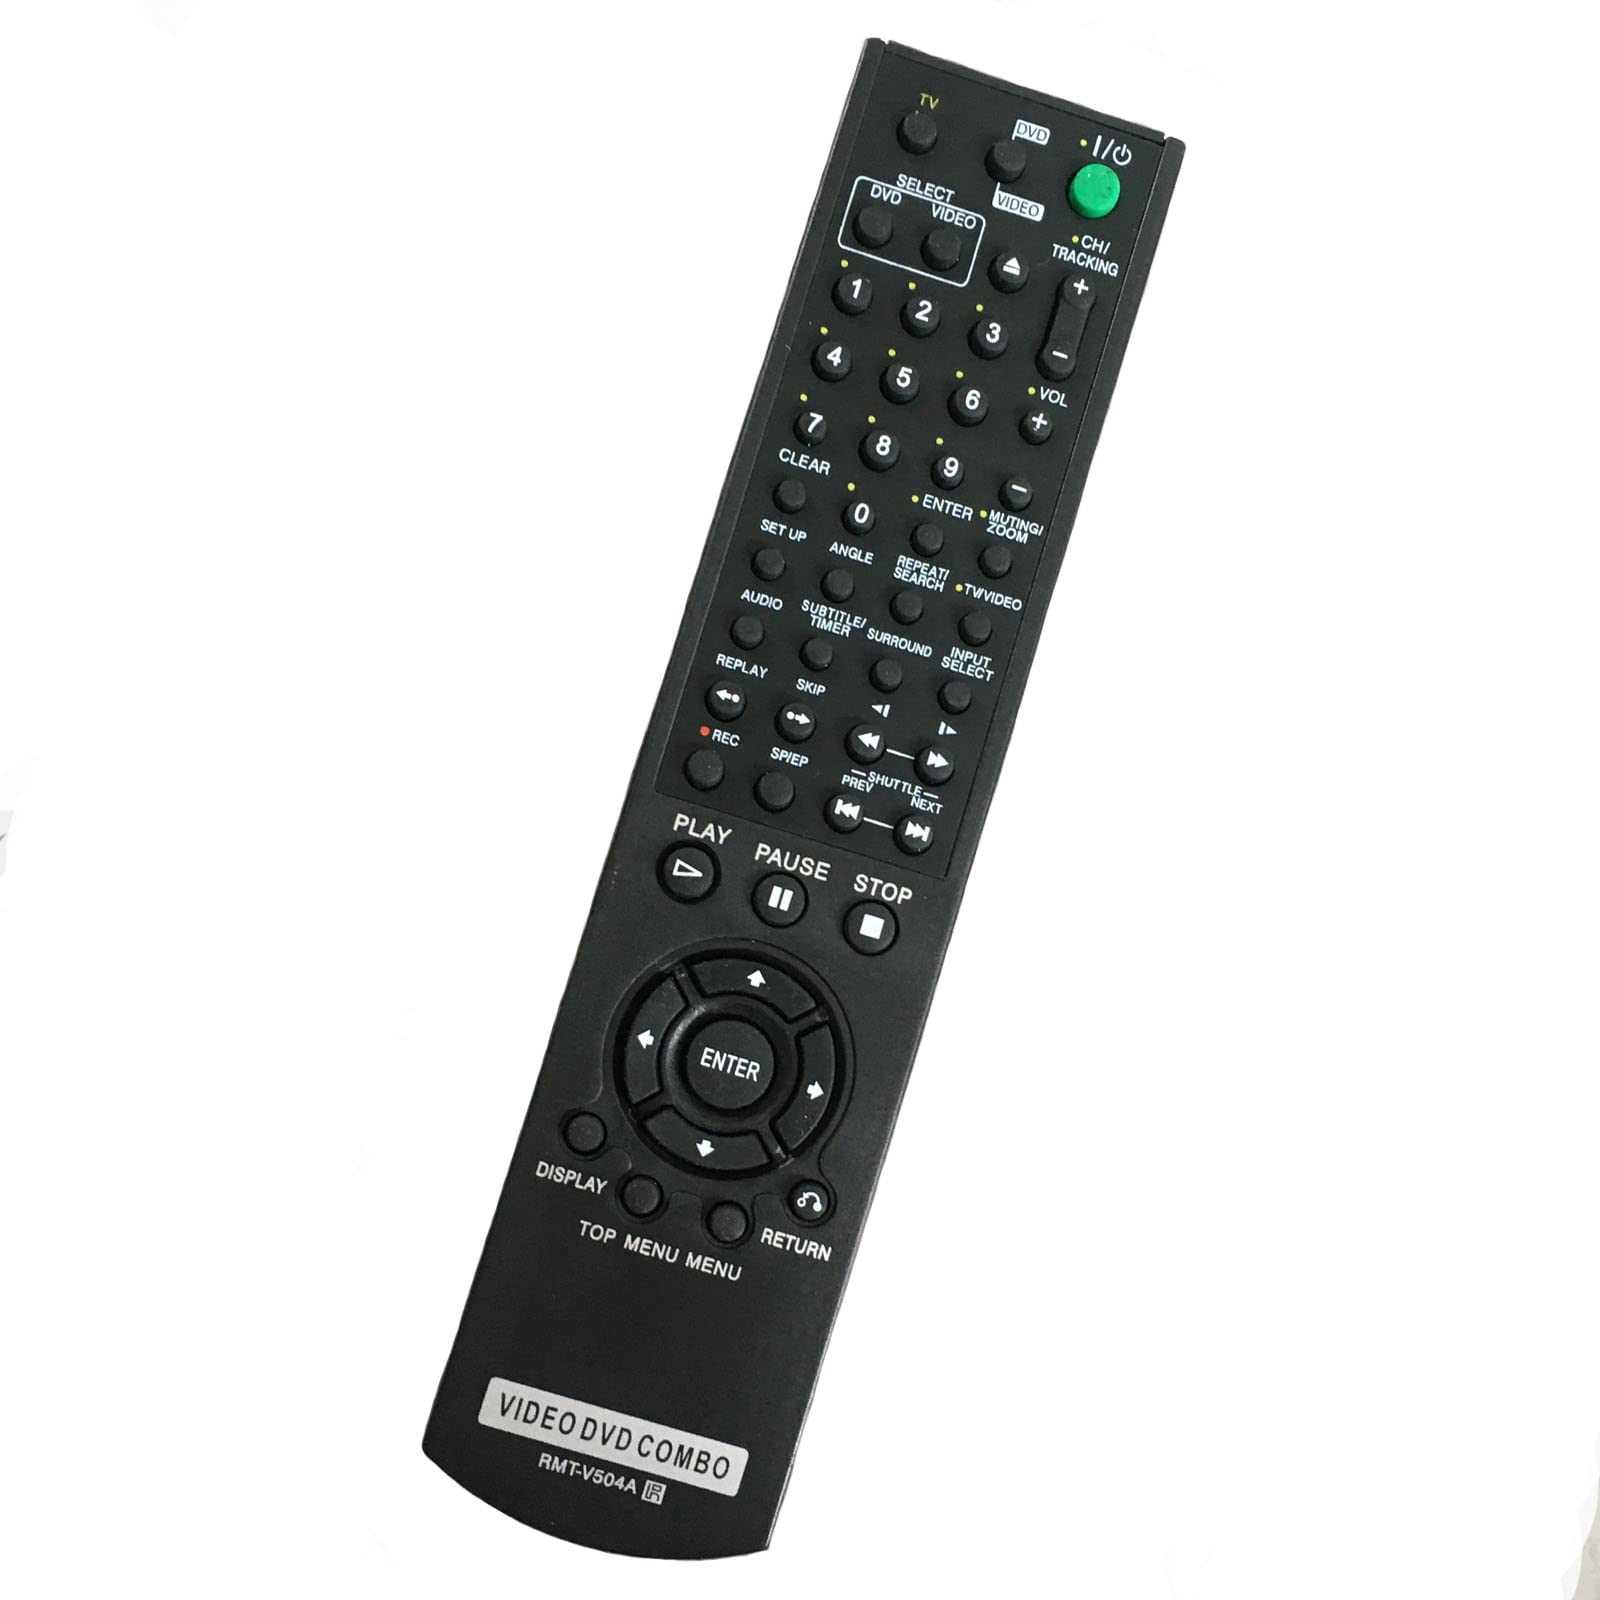 Replacement Remote Control RMT-V504A Fit for Sony DVD/VCR Combo Player Compatible with RMT-V501, RMT-V501A, RMT-V501C, RMT-V501D, RMT-V501E and RMT-V501F